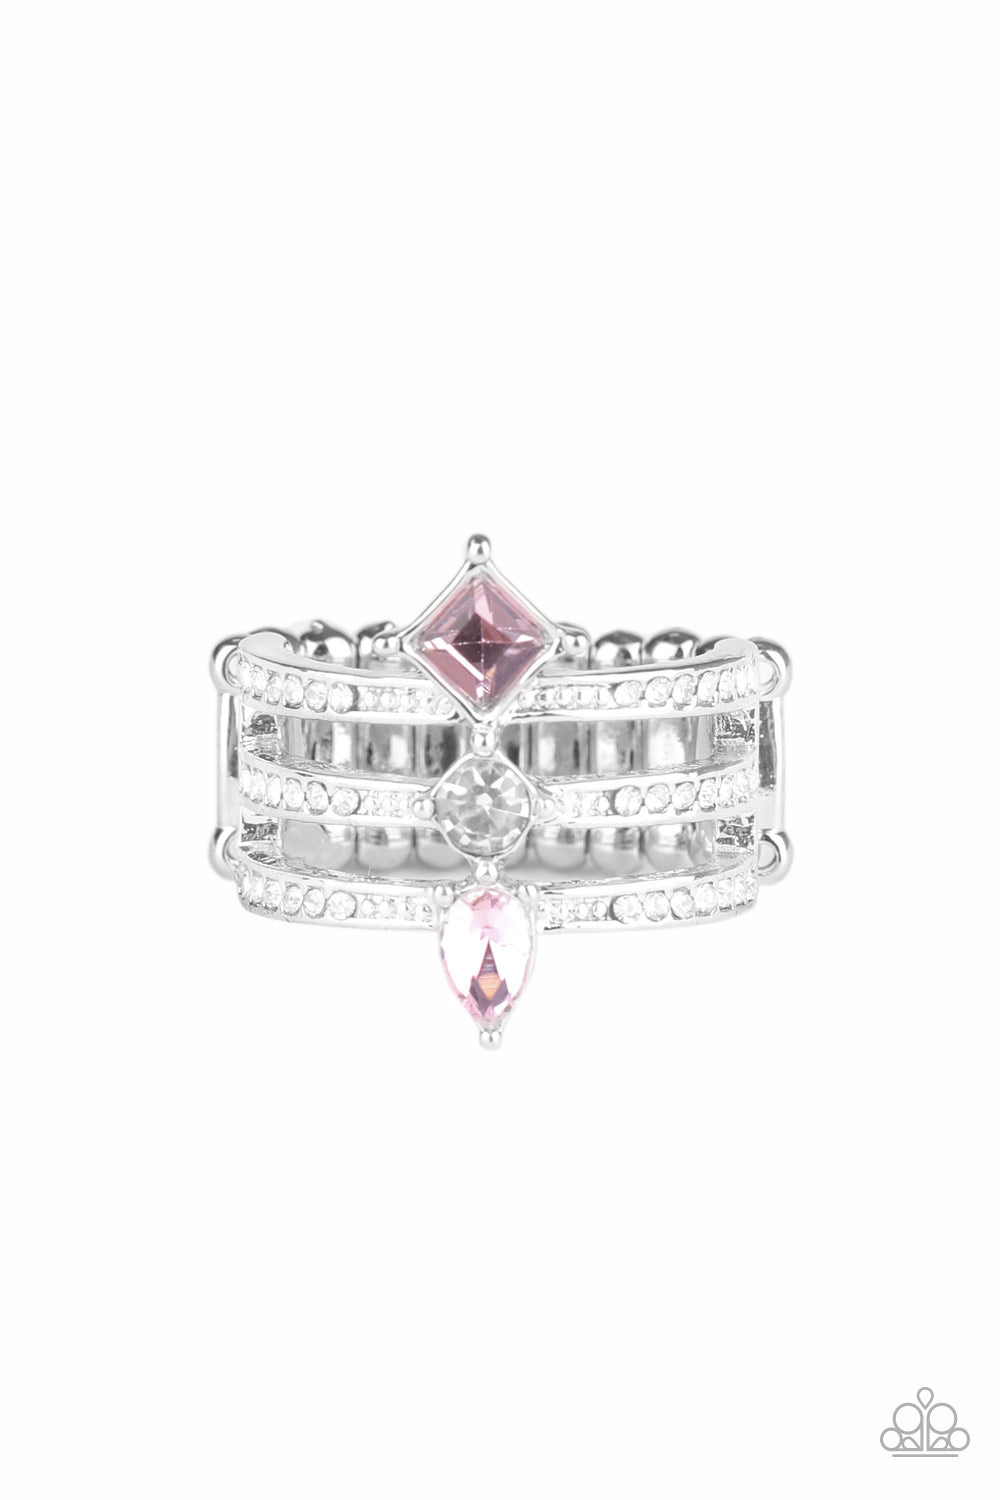 Triple Throne Twinkle - pink - Paparazzi ring